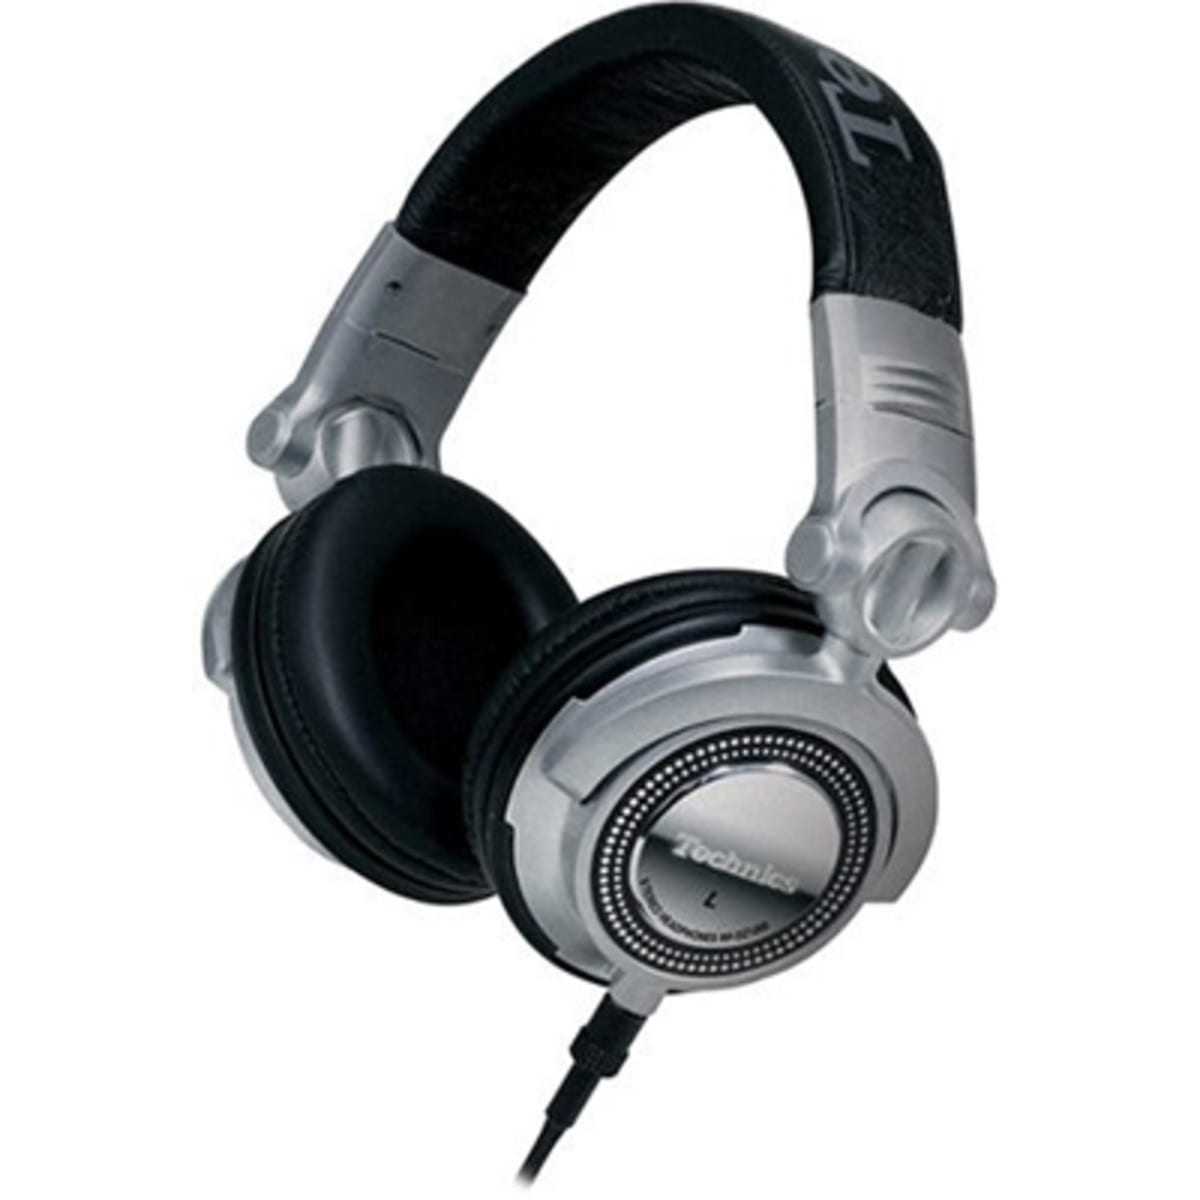 Technics RP-DH1200 at Bounce Online R4,795.00